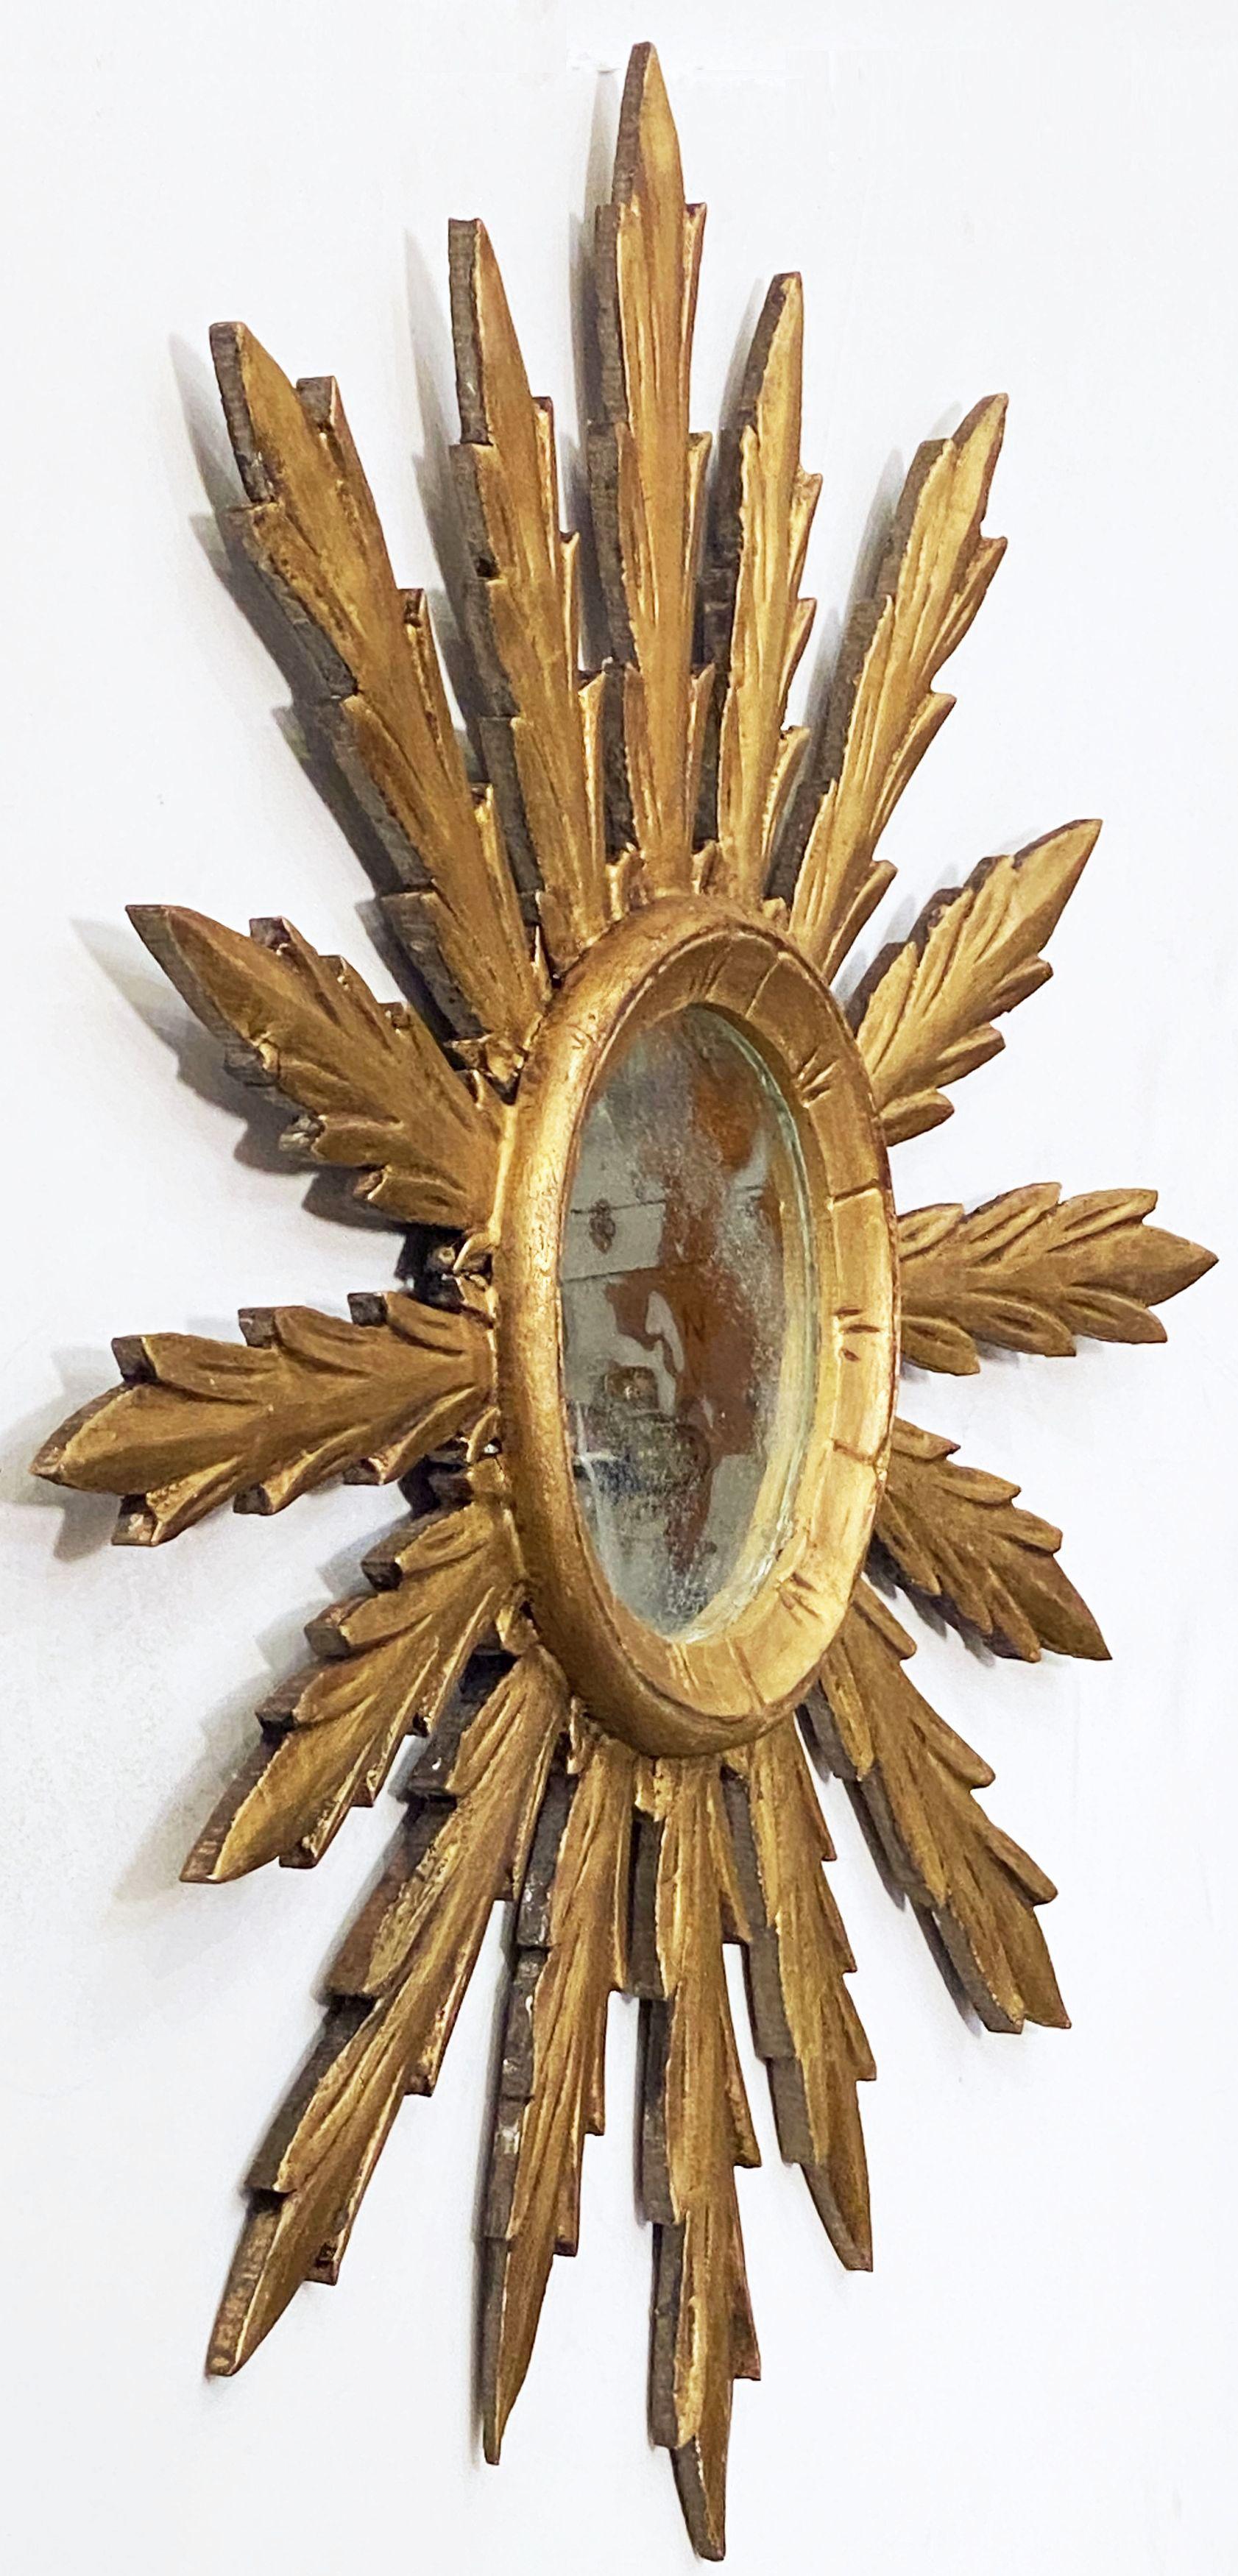 A lovely large Spanish gilt sunburst (or starburst) mirror with original round mirrored glass center in moulded frame.

Diameter of 29 inches.